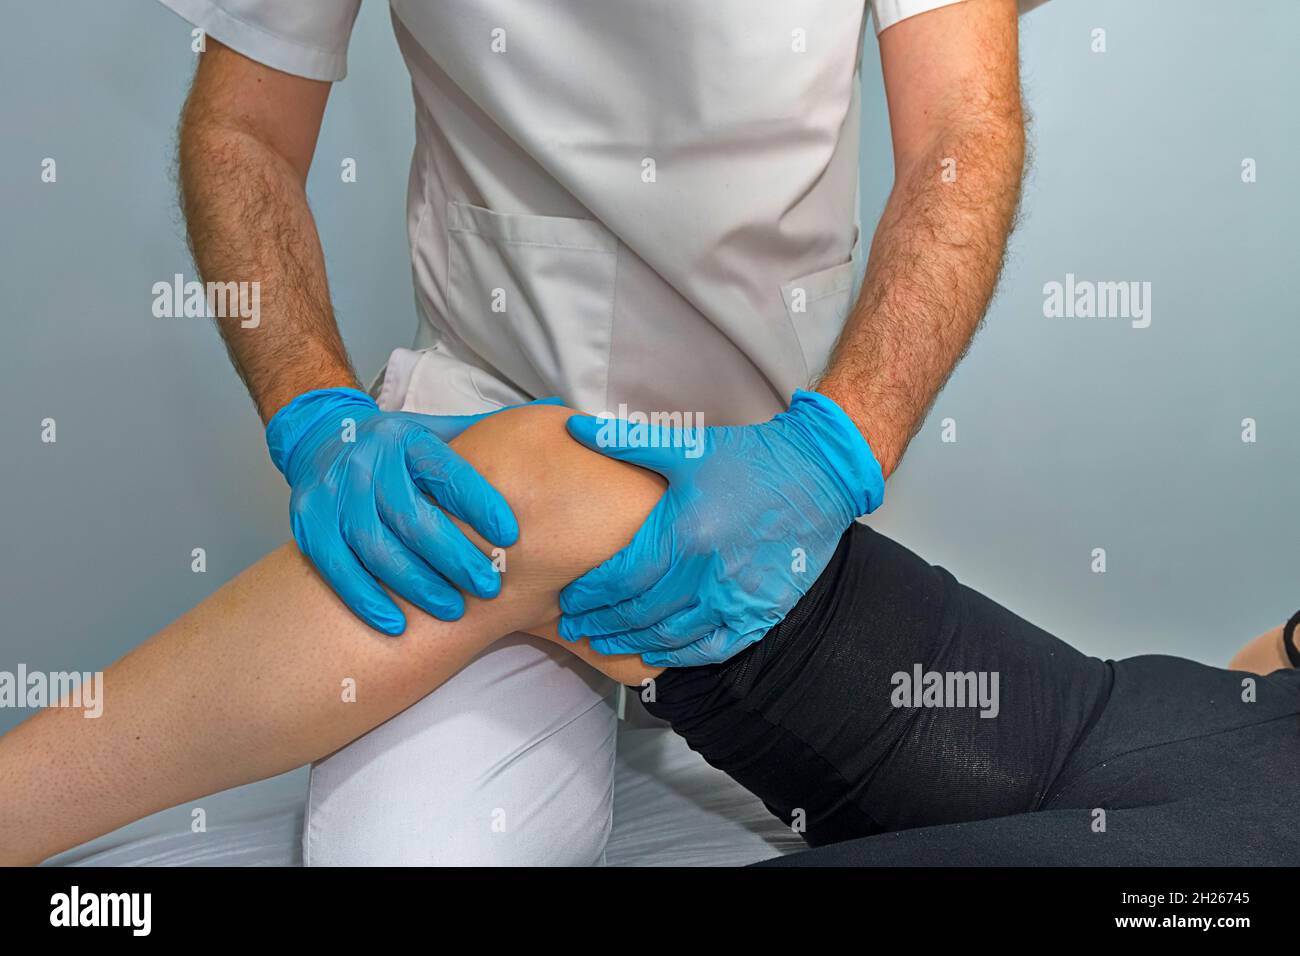 Physician working on examining a girl's injured foot Stock Photo